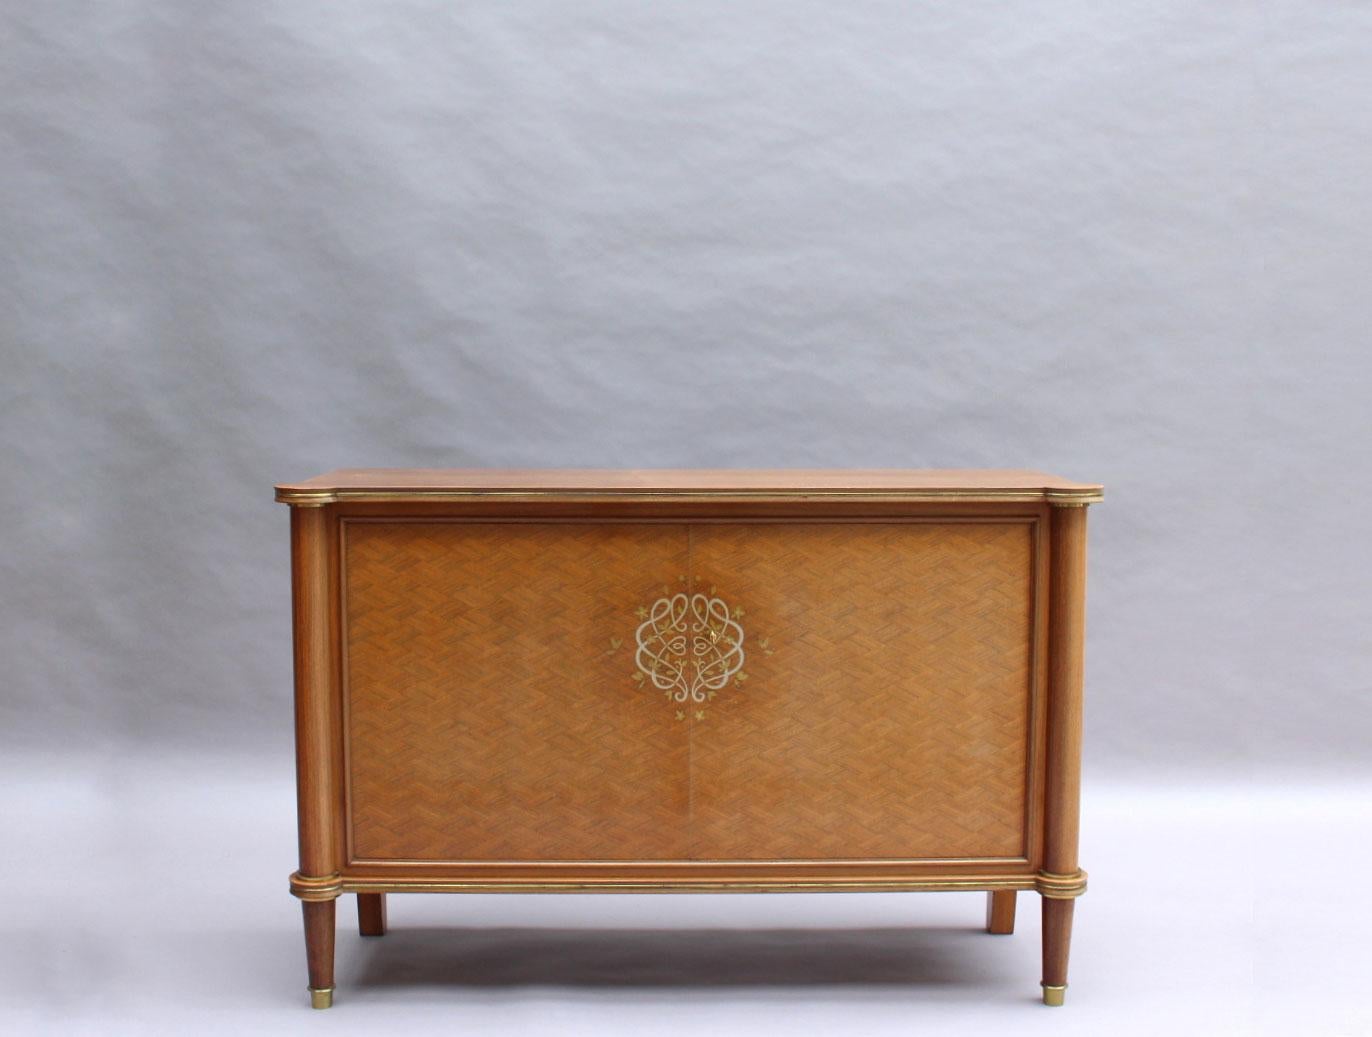 Jules Leleu: A fine French Art Deco Palisander and marquetry buffet / commode with bronze details.
Signed.